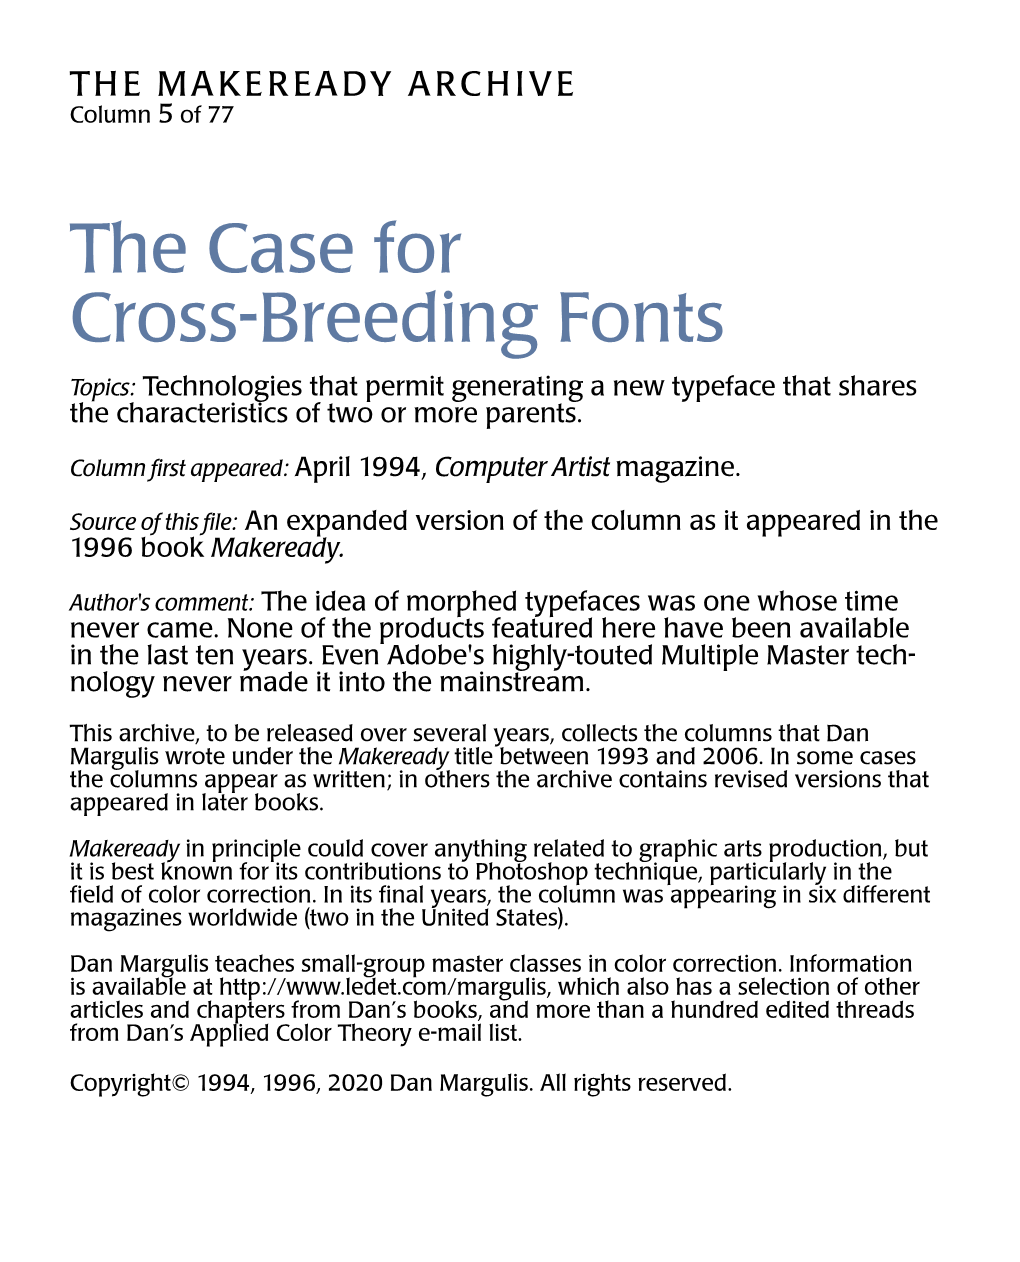 The Case for Cross-Breeding Fonts Topics: Technologies That Permit Generating a New Typeface That Shares the Characteristics of Two Or More Parents